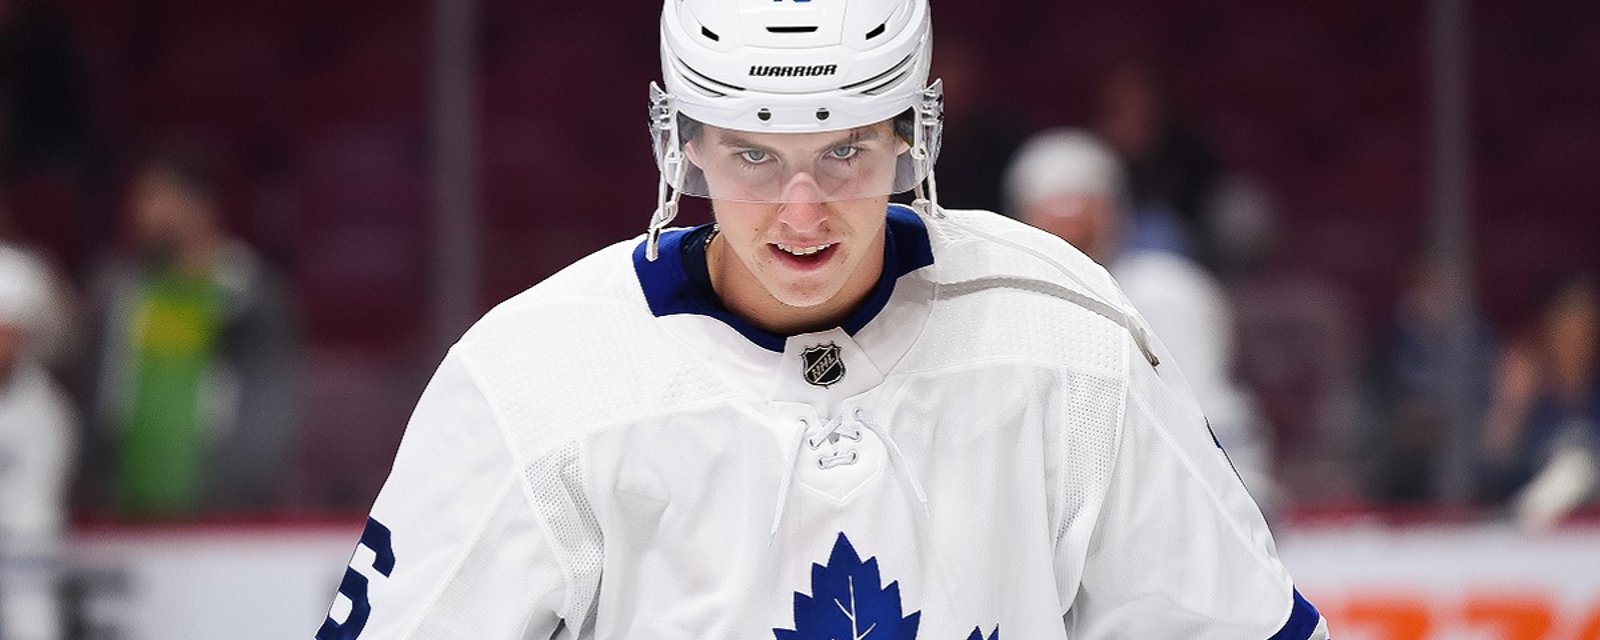 Two top NHL insiders suggest there is a real chance Mitch Marner could be traded.